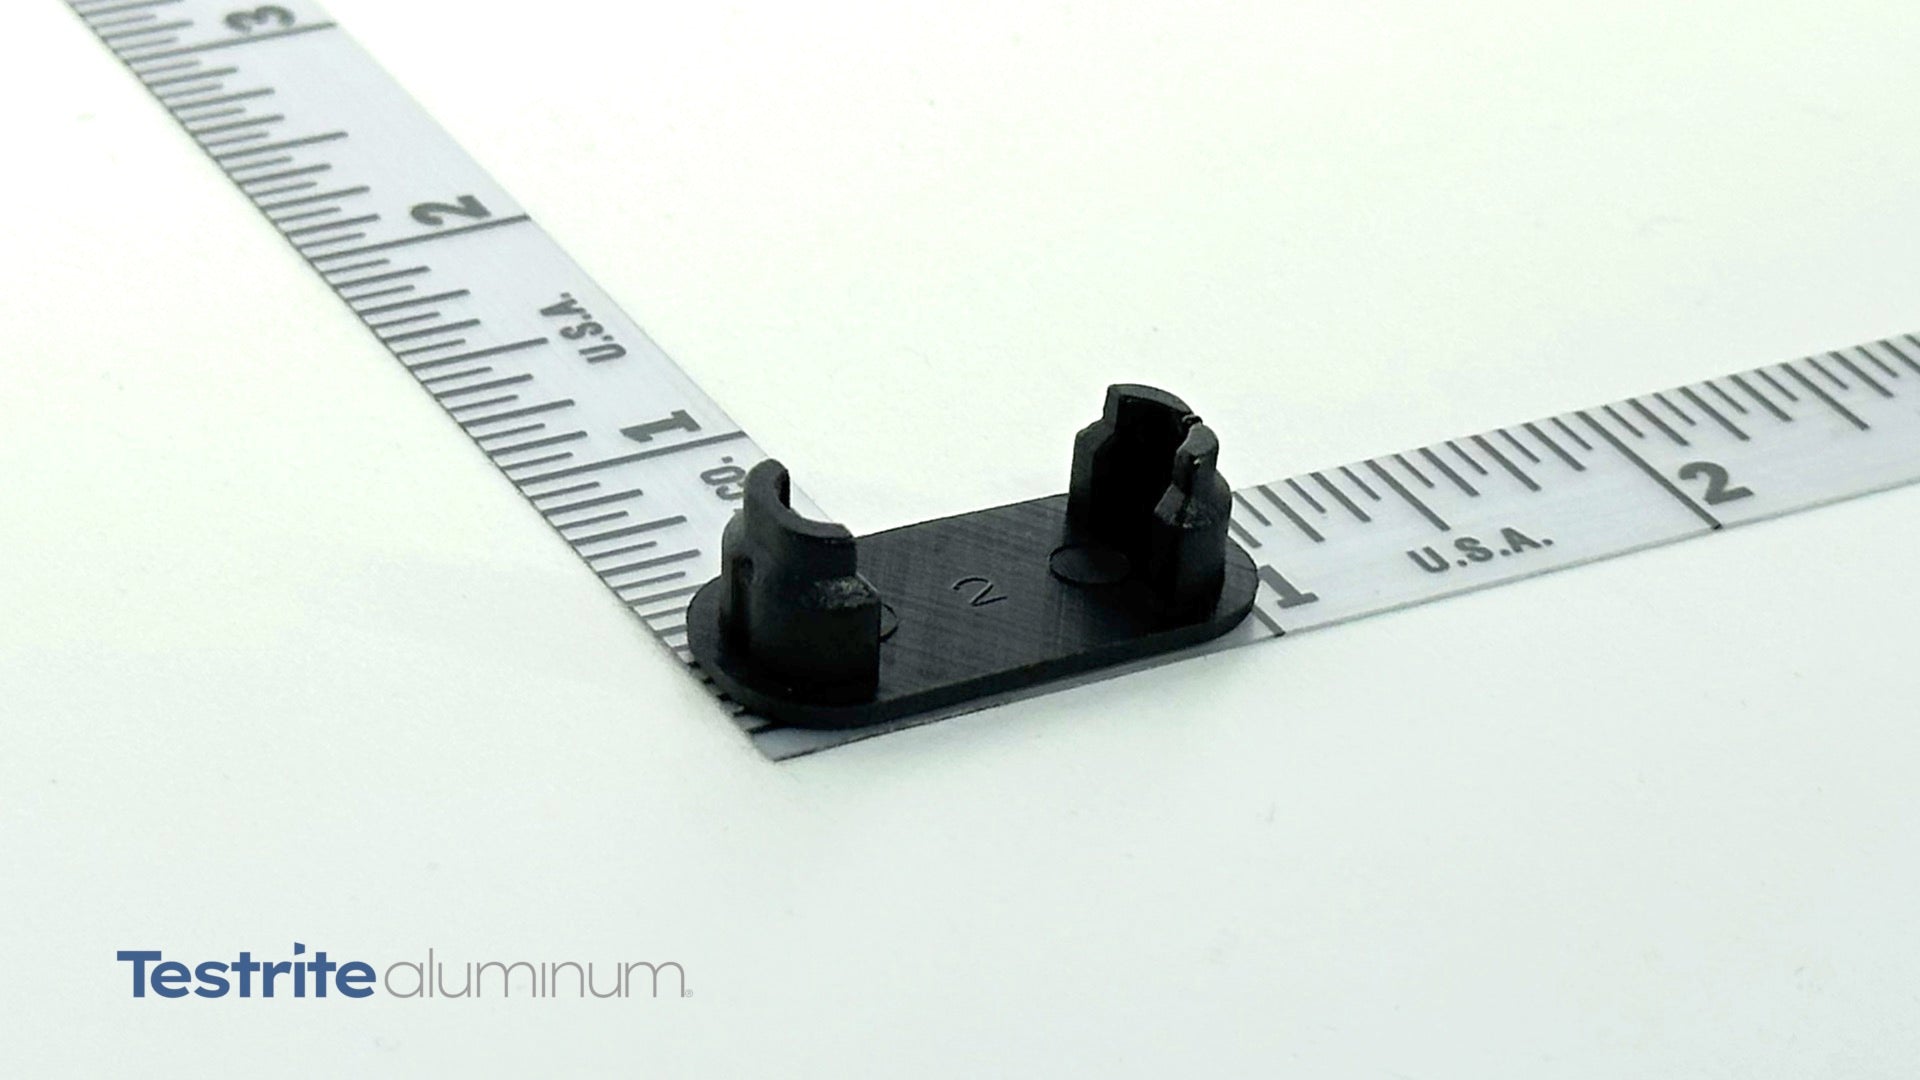 End cap for 1/2" x 1-1/8" Oval Aluminum Extrusion with ruler for dimension